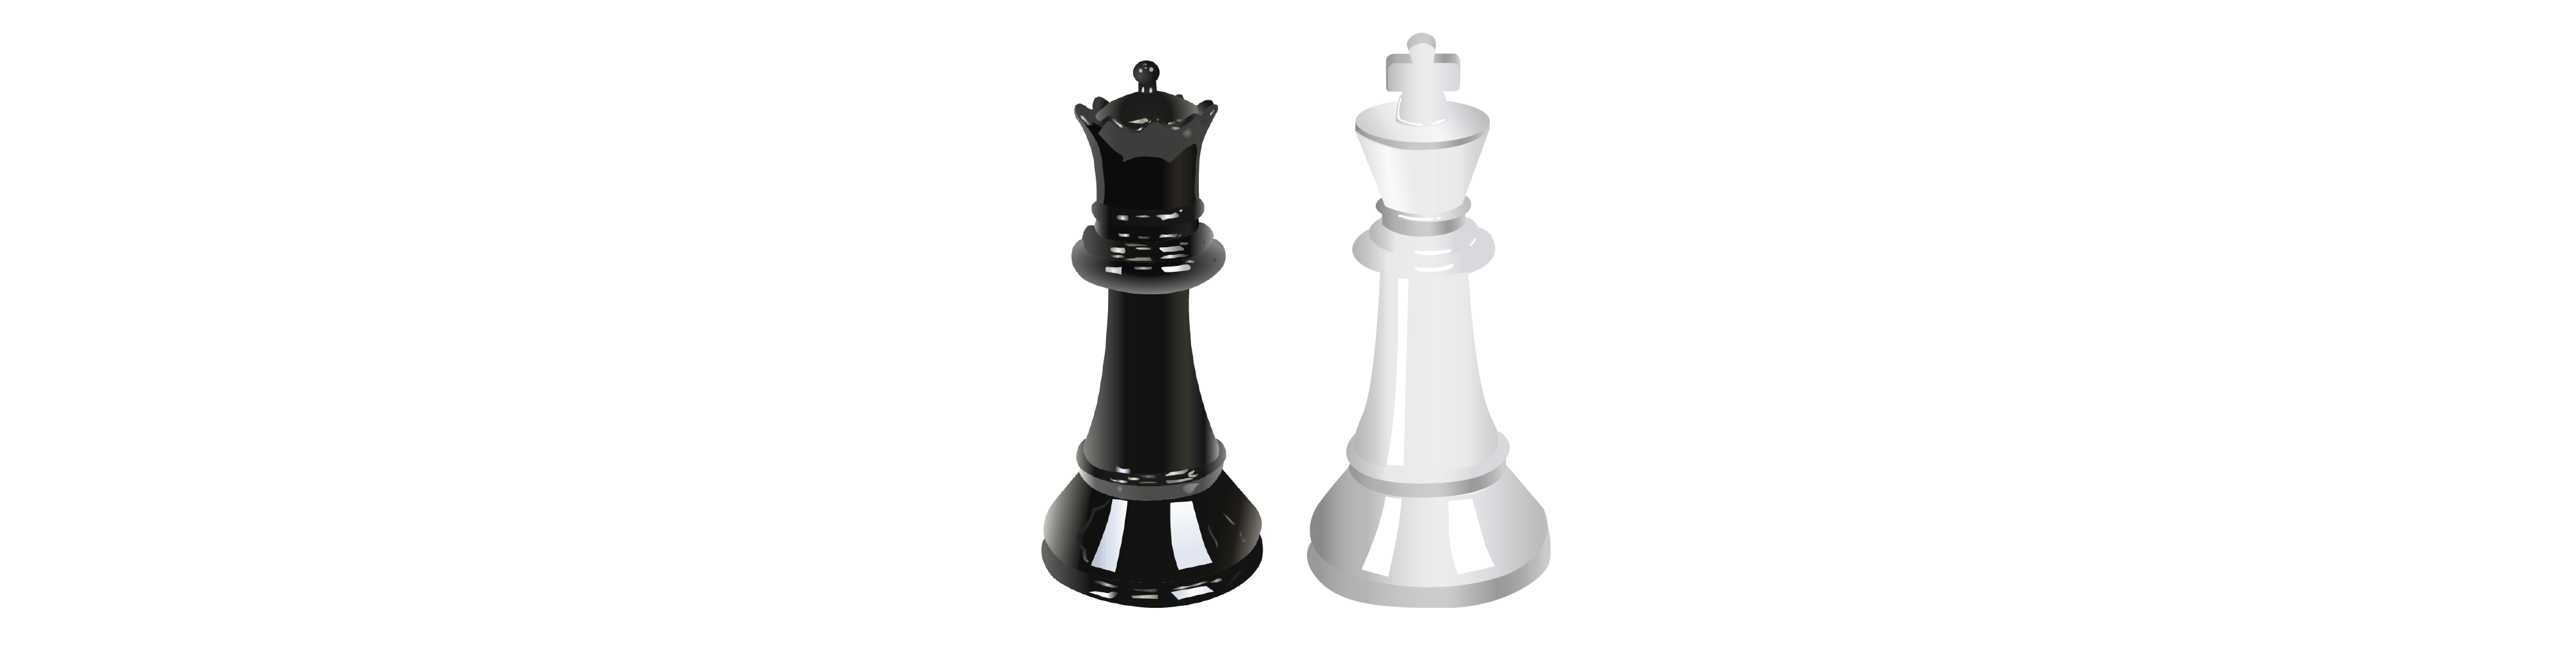 Black chess piece to the left of a white chess piece.